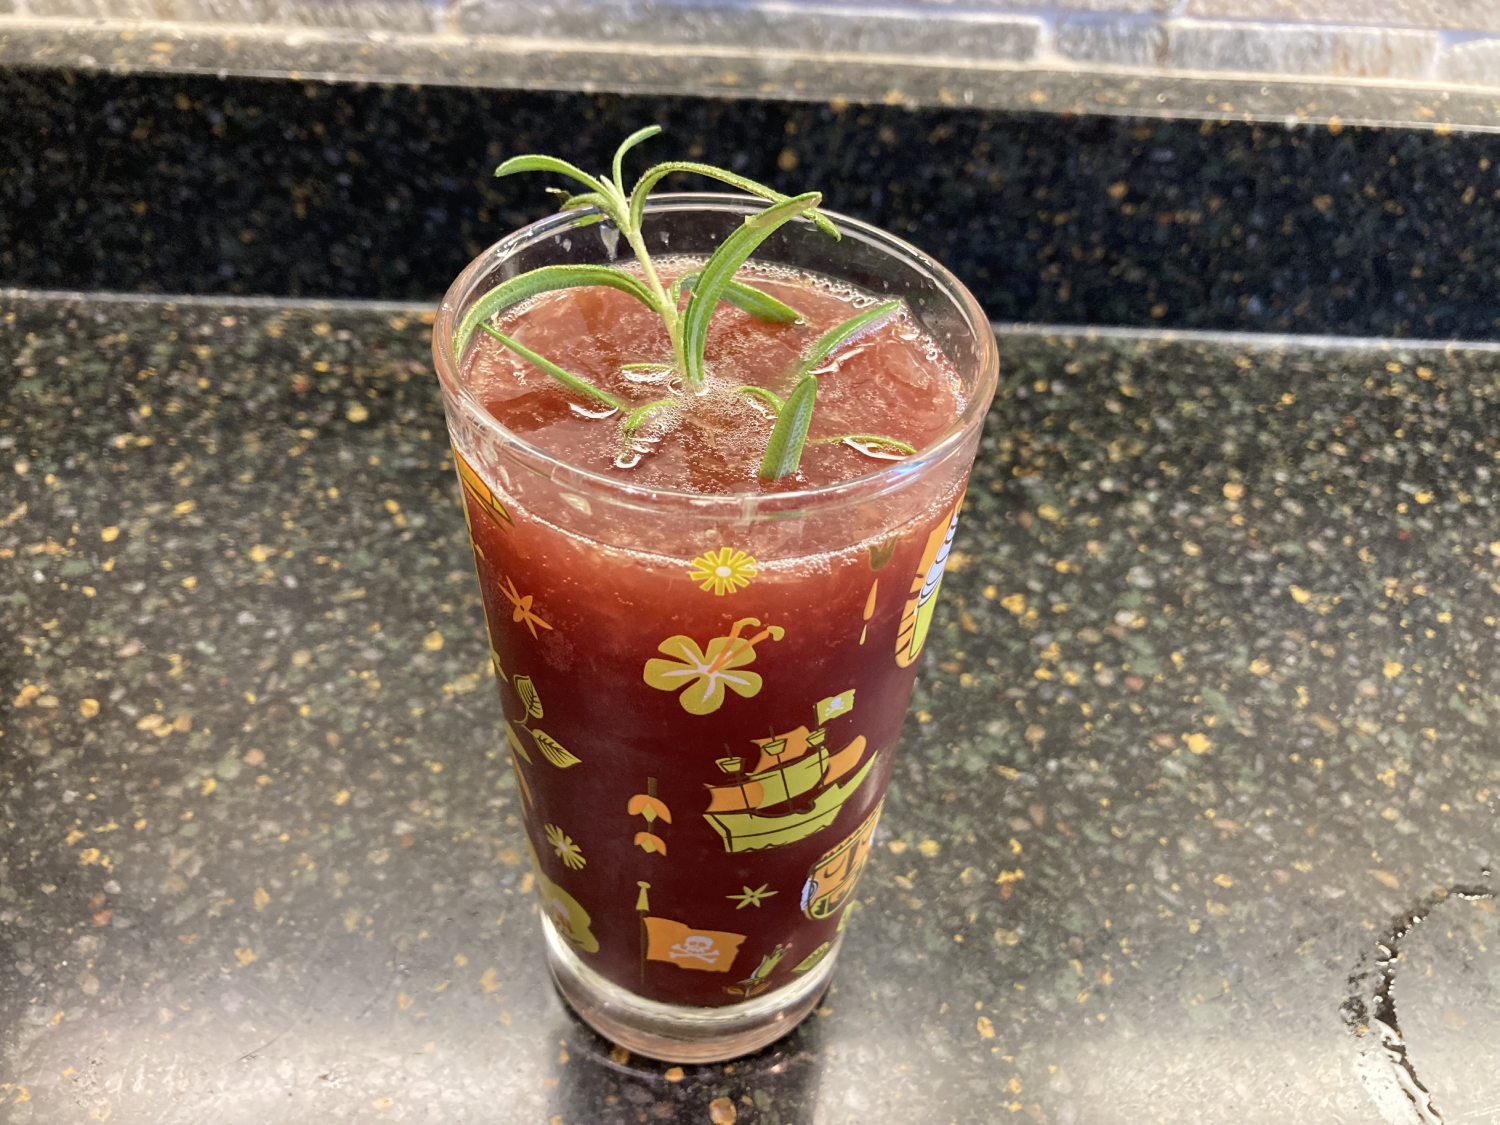 Full glass of juice and ginger ale mix with a sprig of fresh green rosemary sticking out of the center